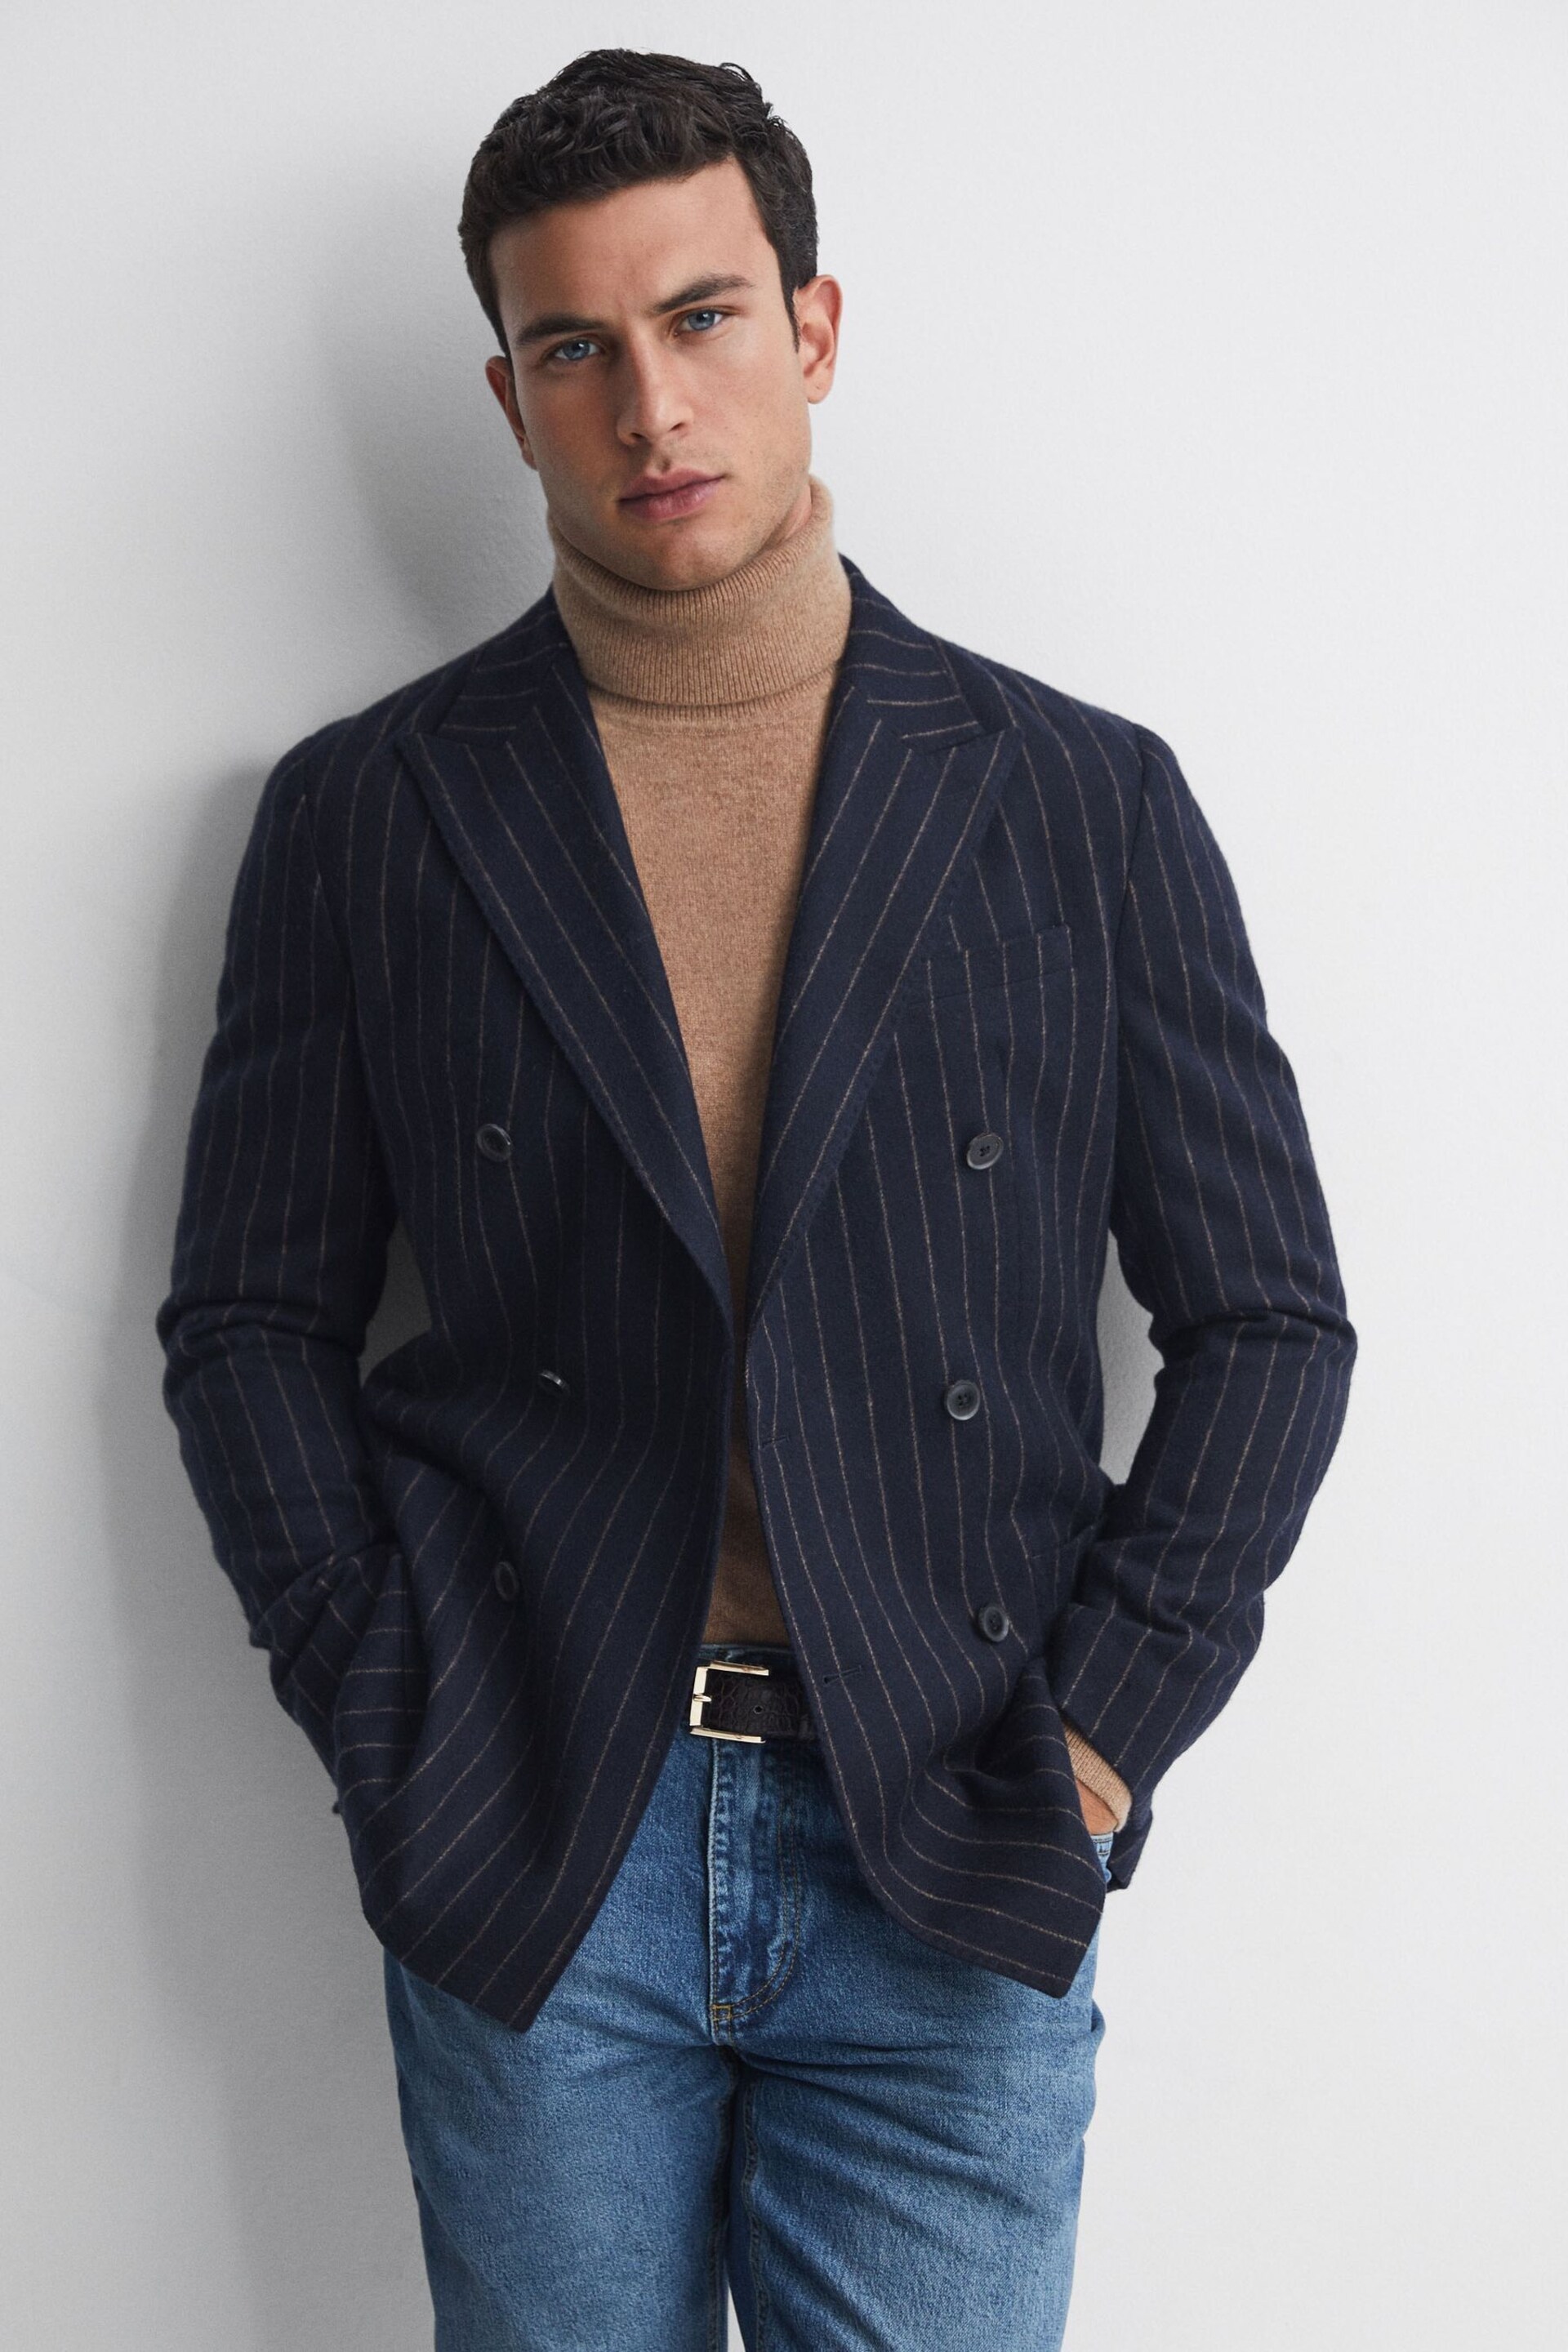 Reiss Navy Patch Slim Fit Wool Double Breasted Pinstripe Blazer - Image 1 of 7